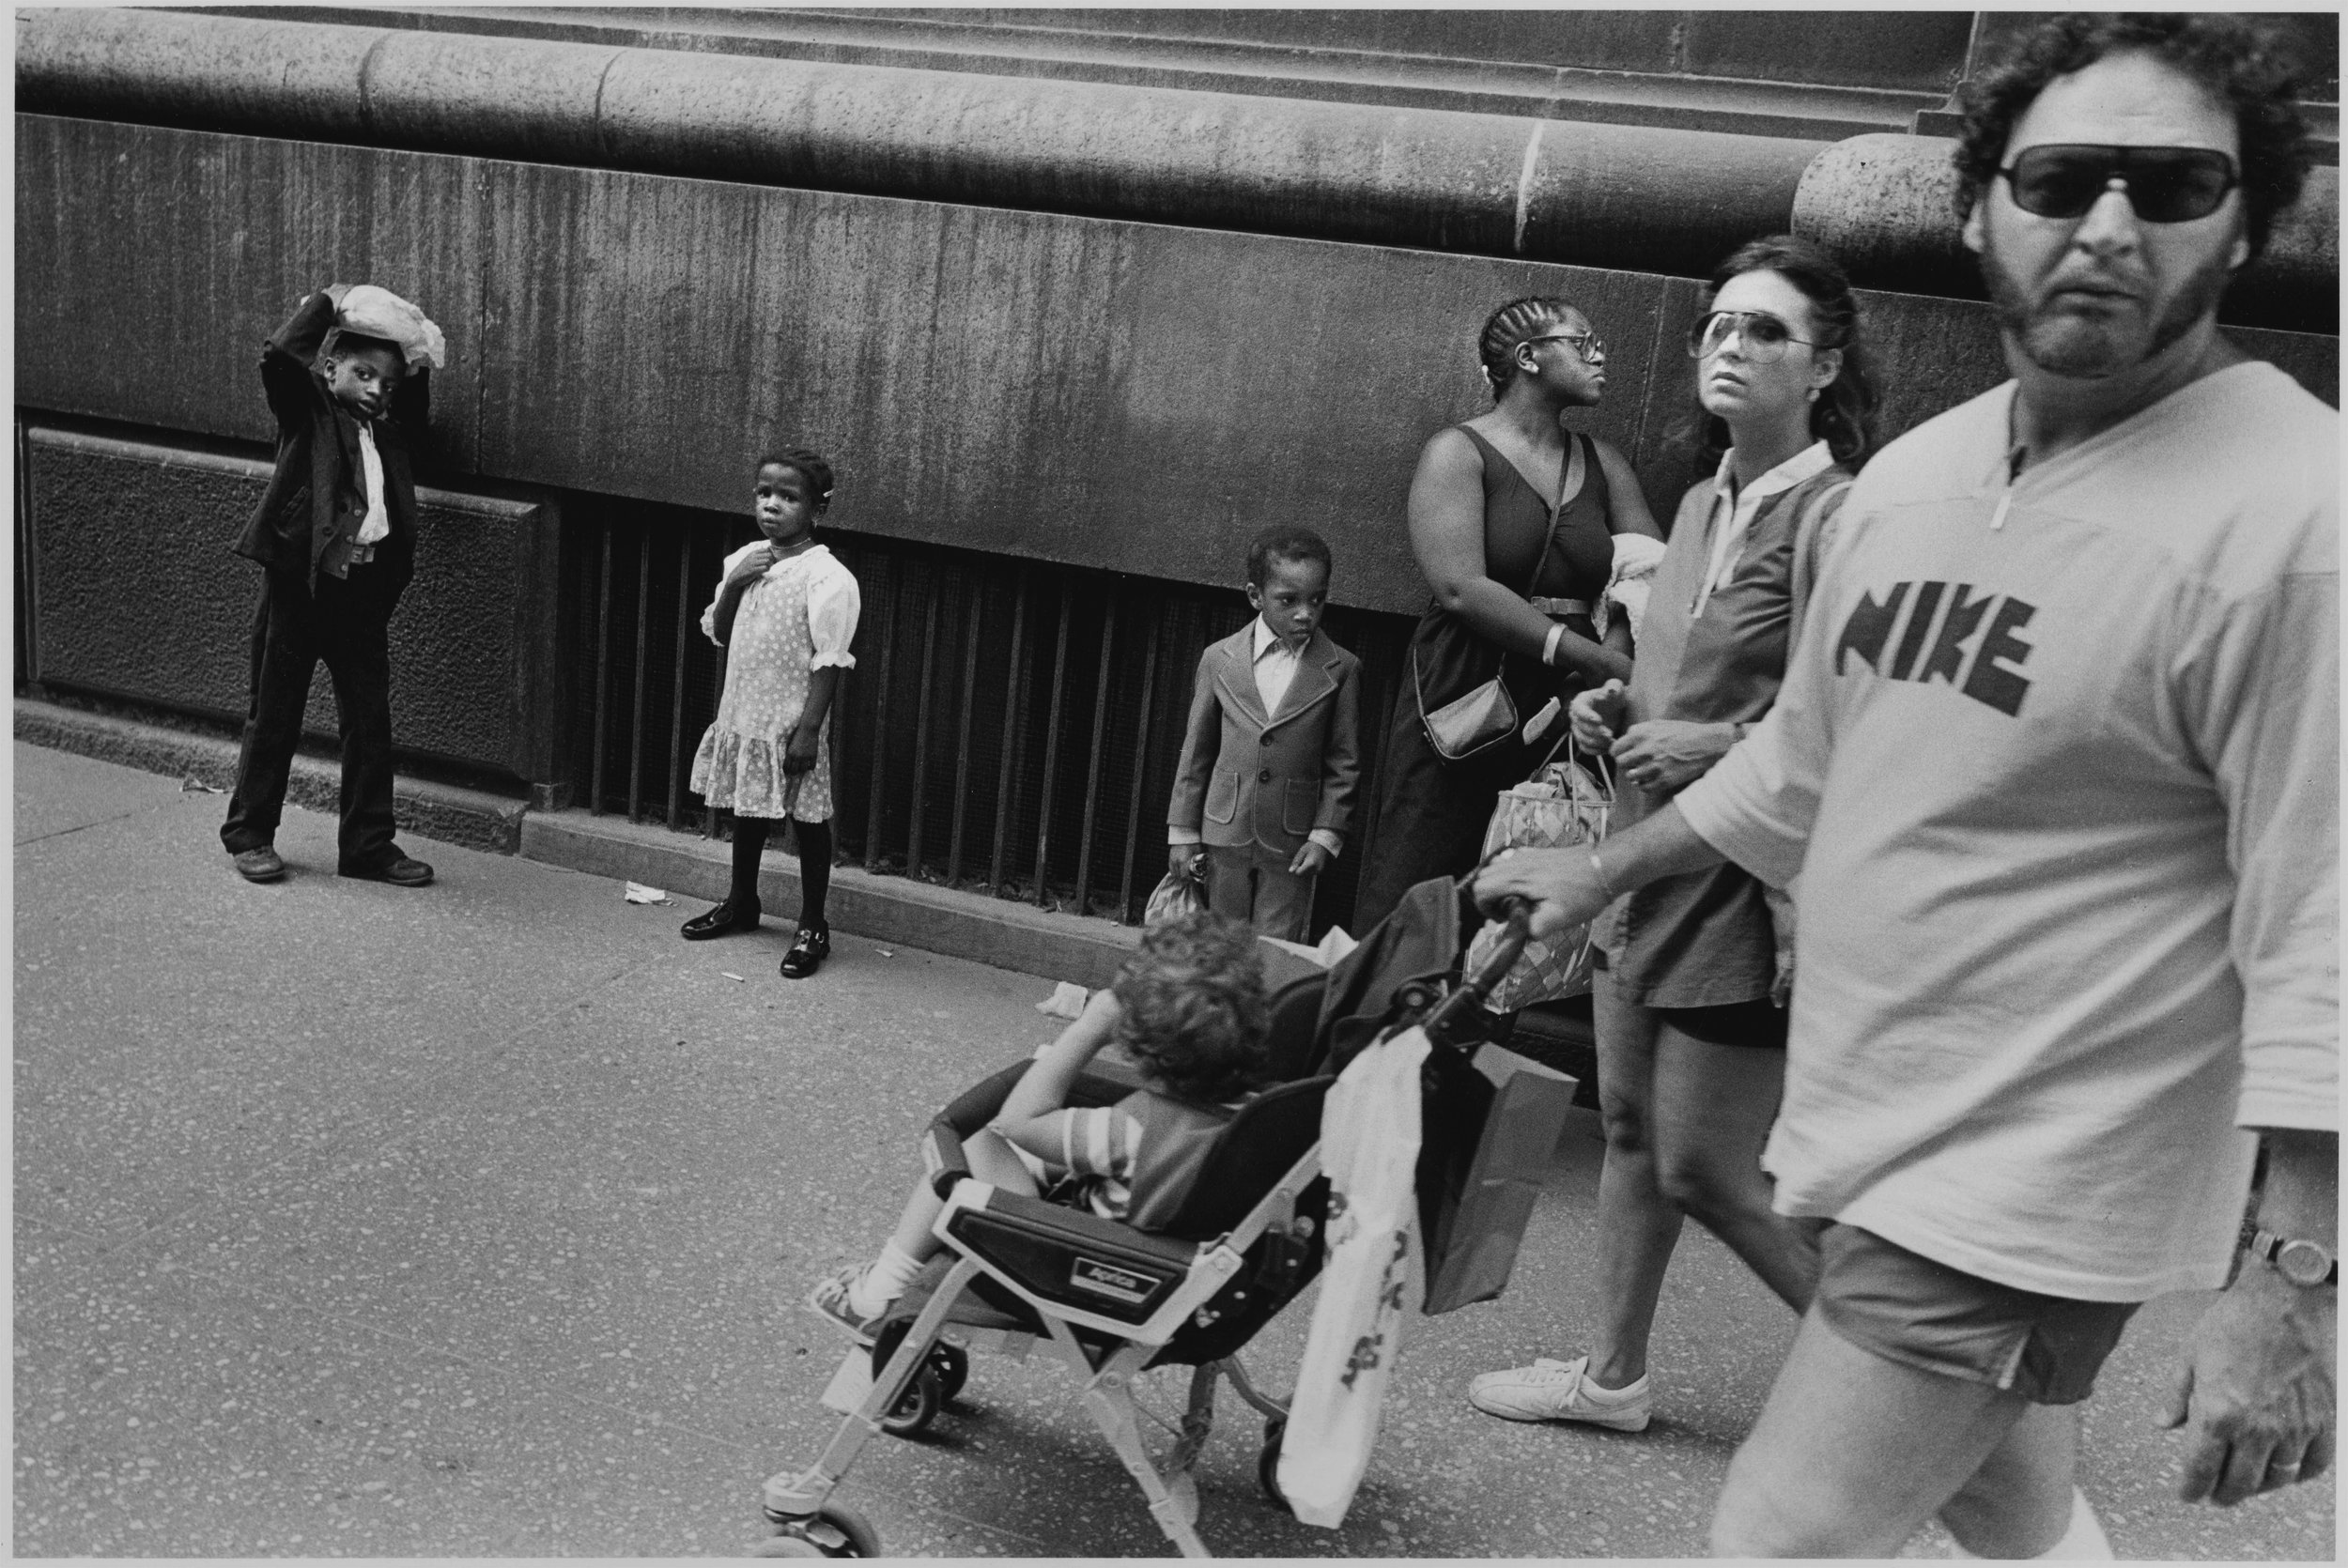 black and white families, 5th ave., nyc, c. 1987